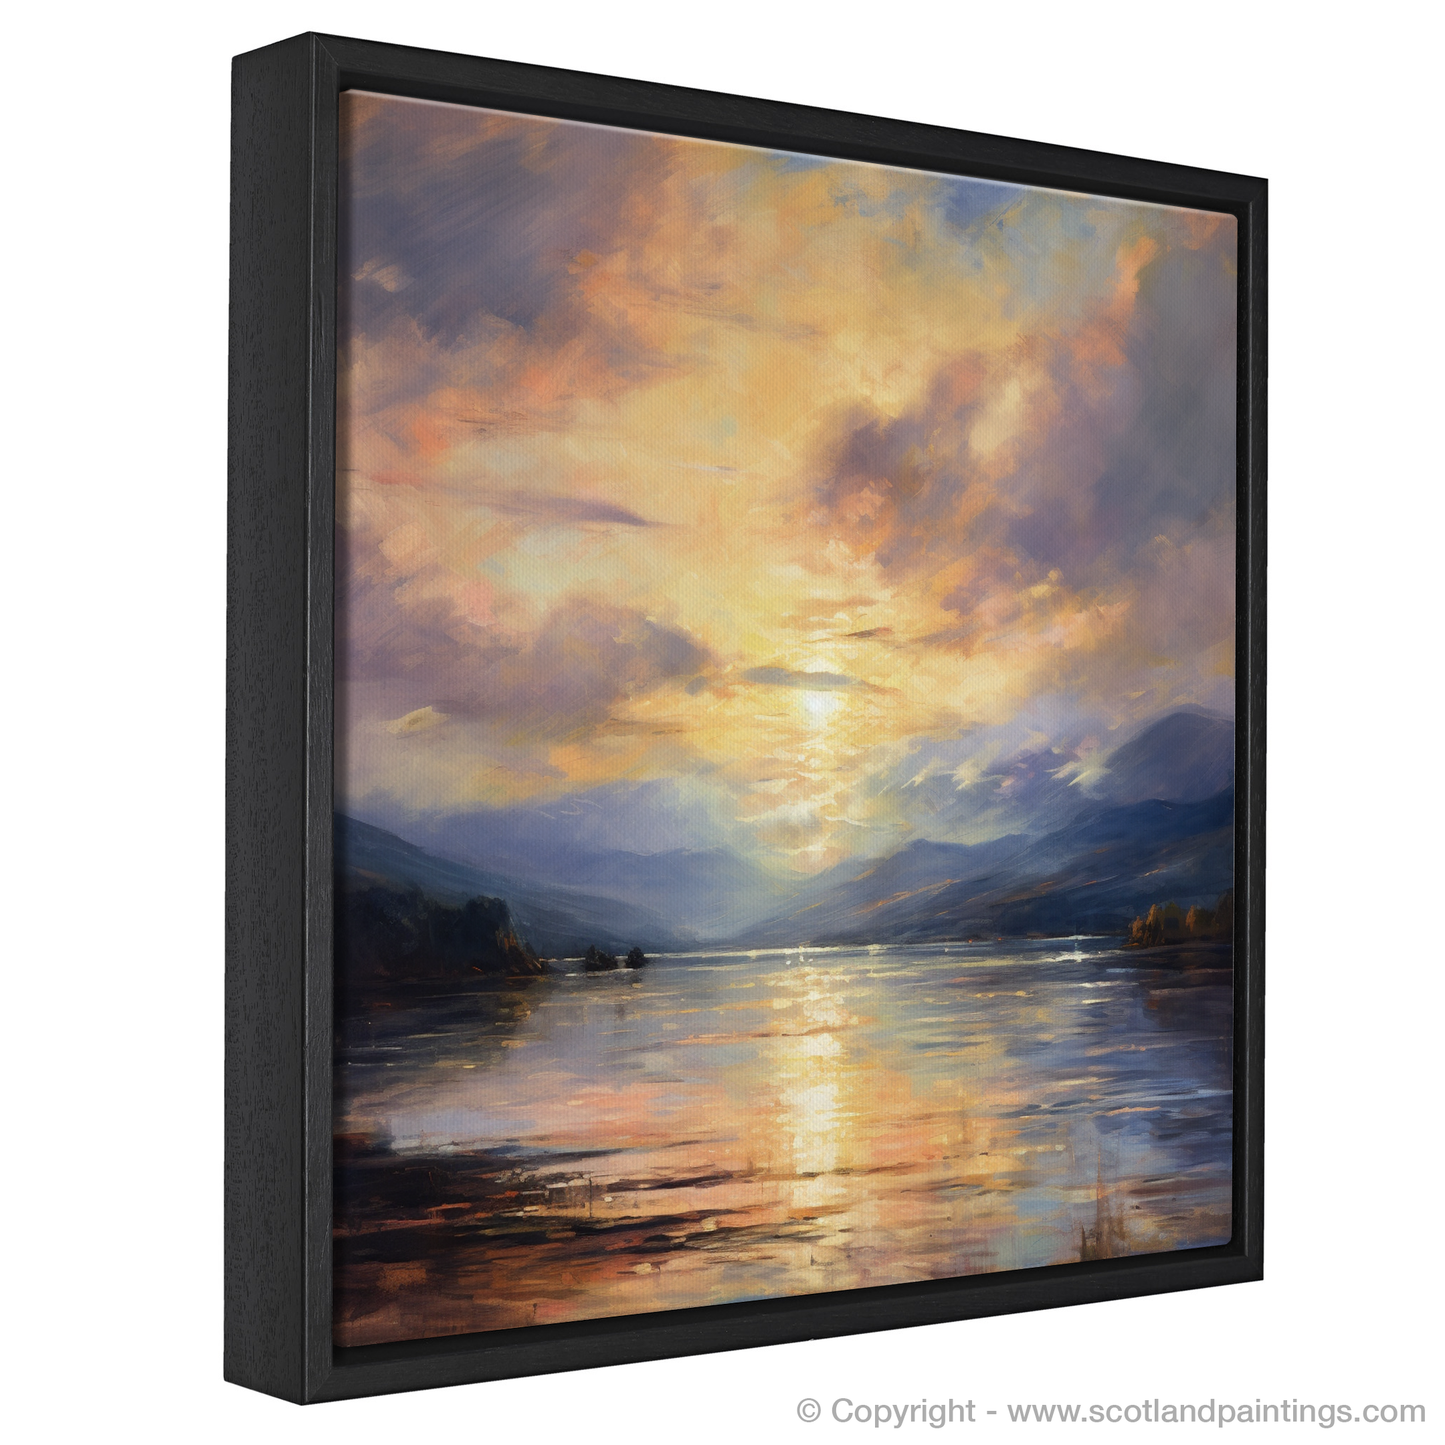 Painting and Art Print of Crepuscular rays above Loch Lomond entitled "Dancing Light of Loch Lomond".